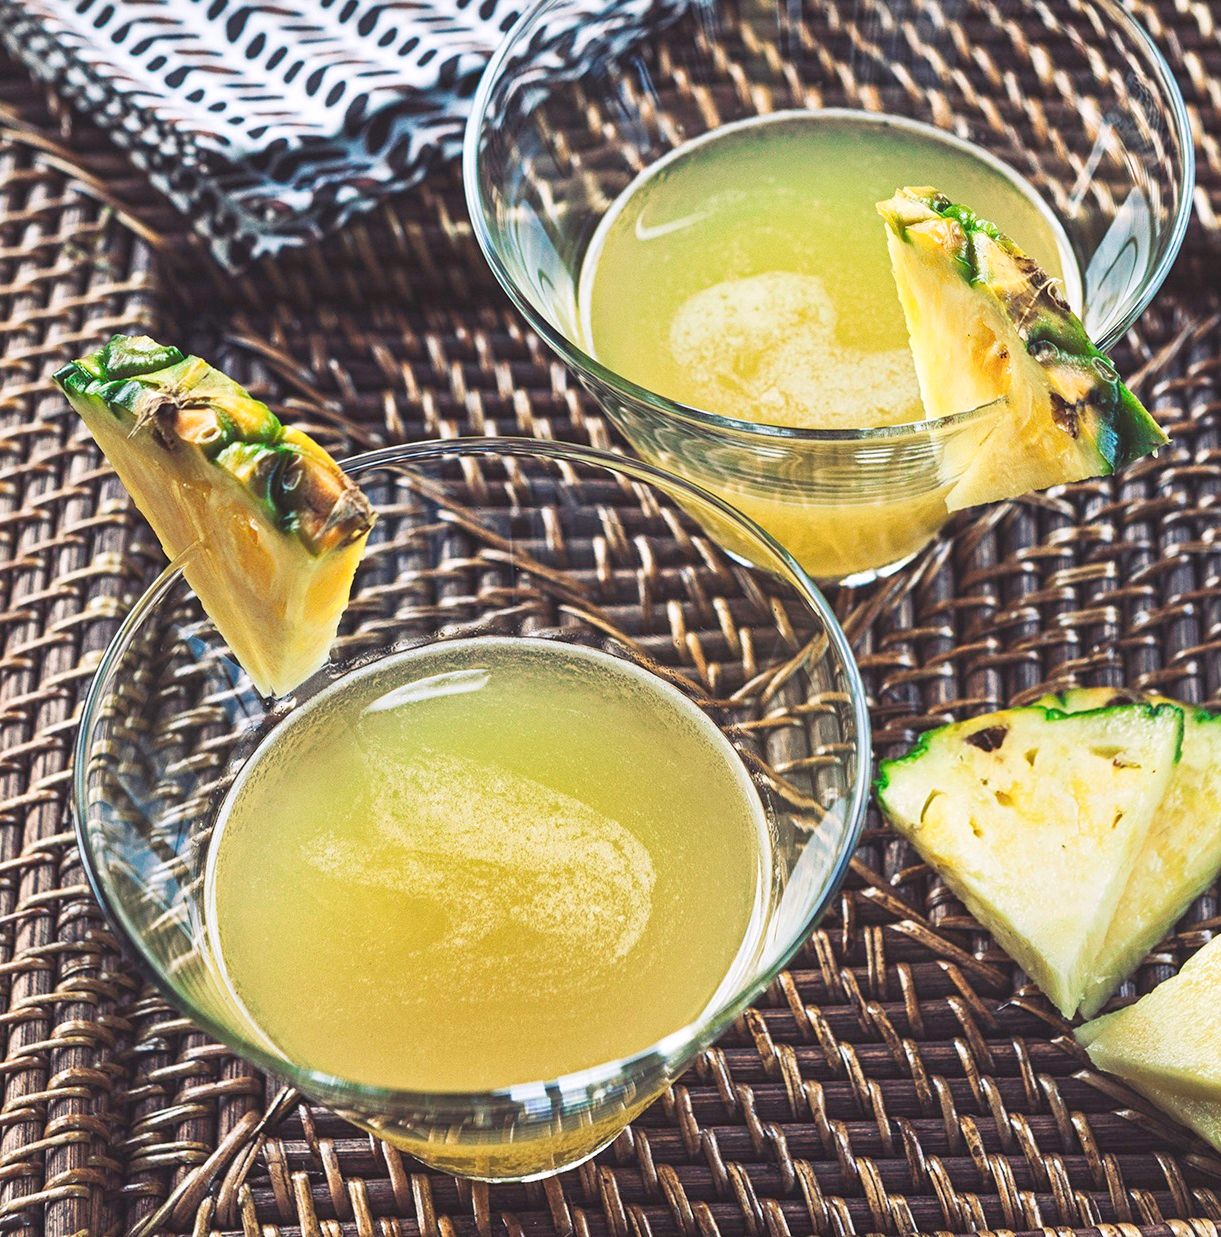 Sandals Grilled Pineapple Cocktail Recipes For The Holidays!